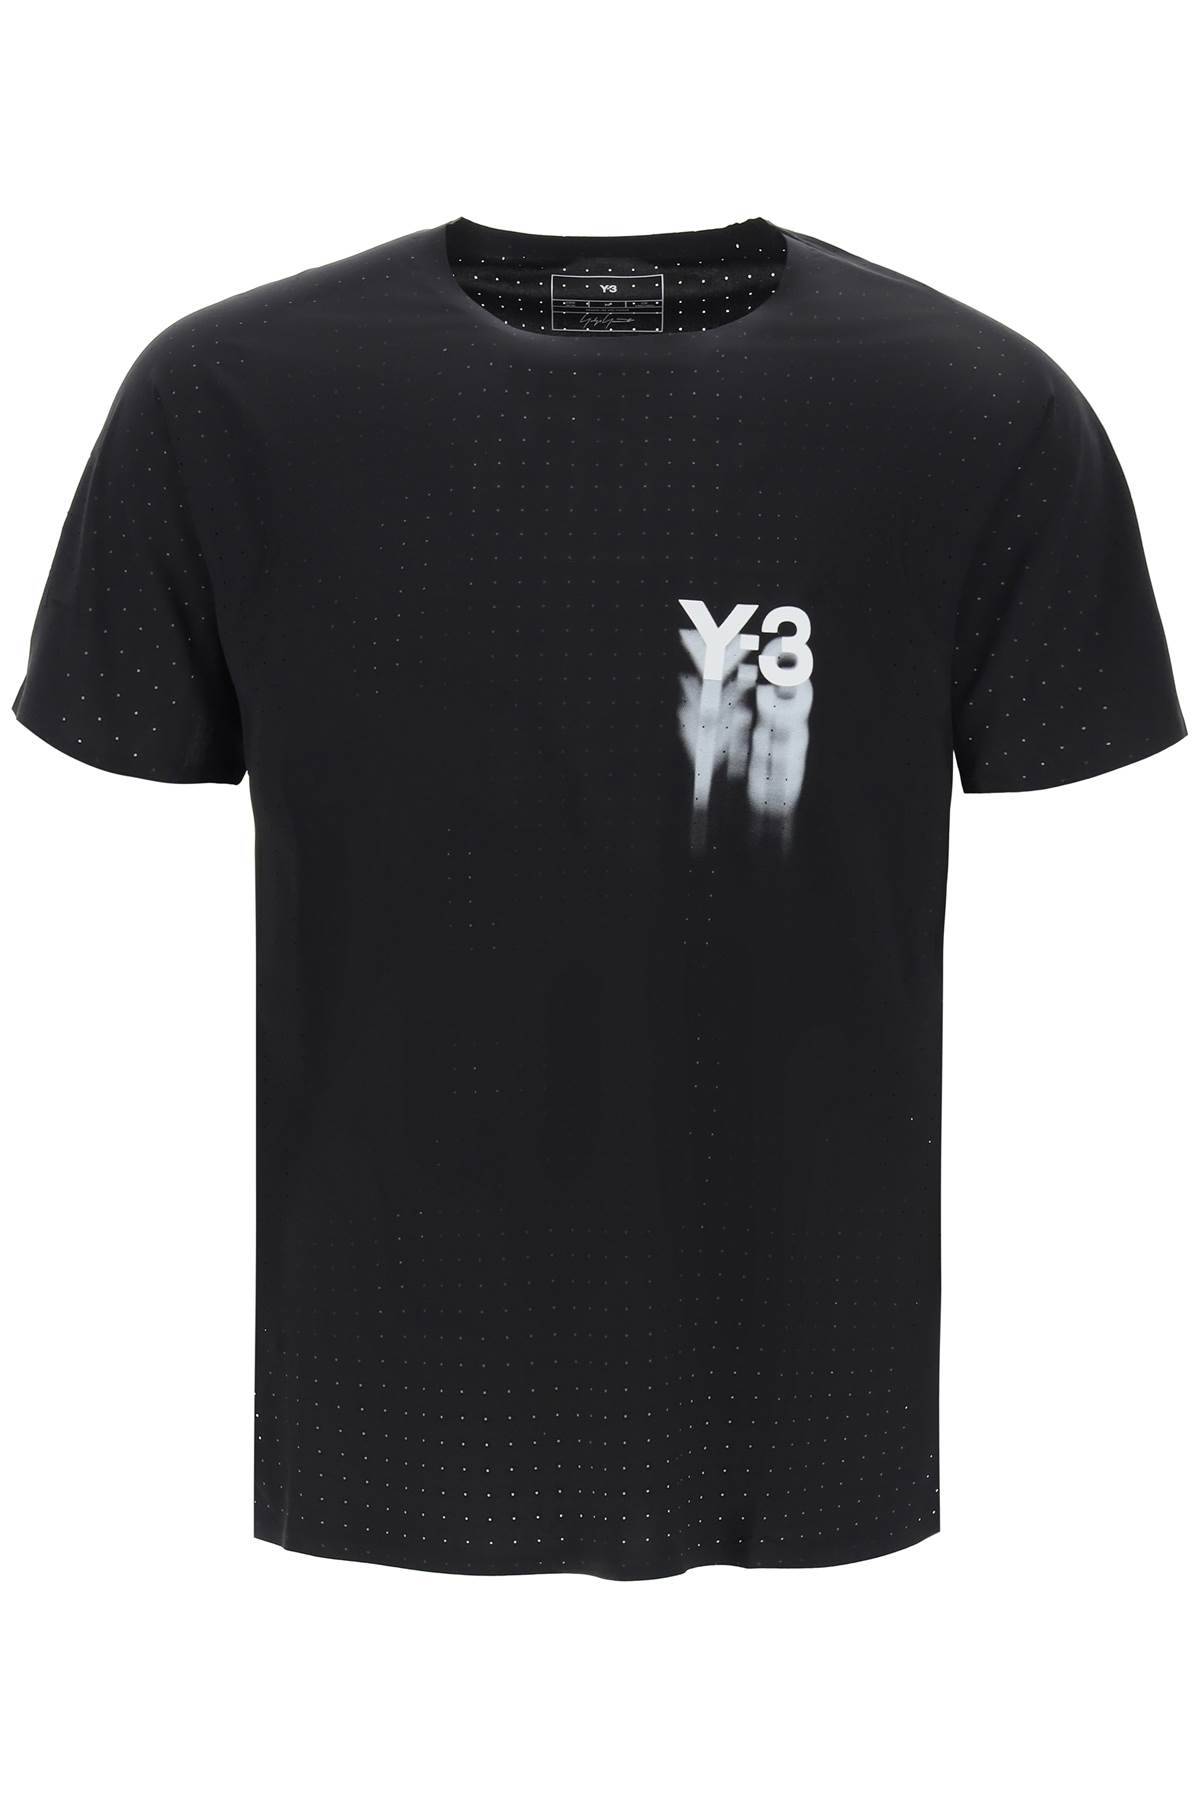 Y-3 Y-3 short-sleeved perforated jersey t